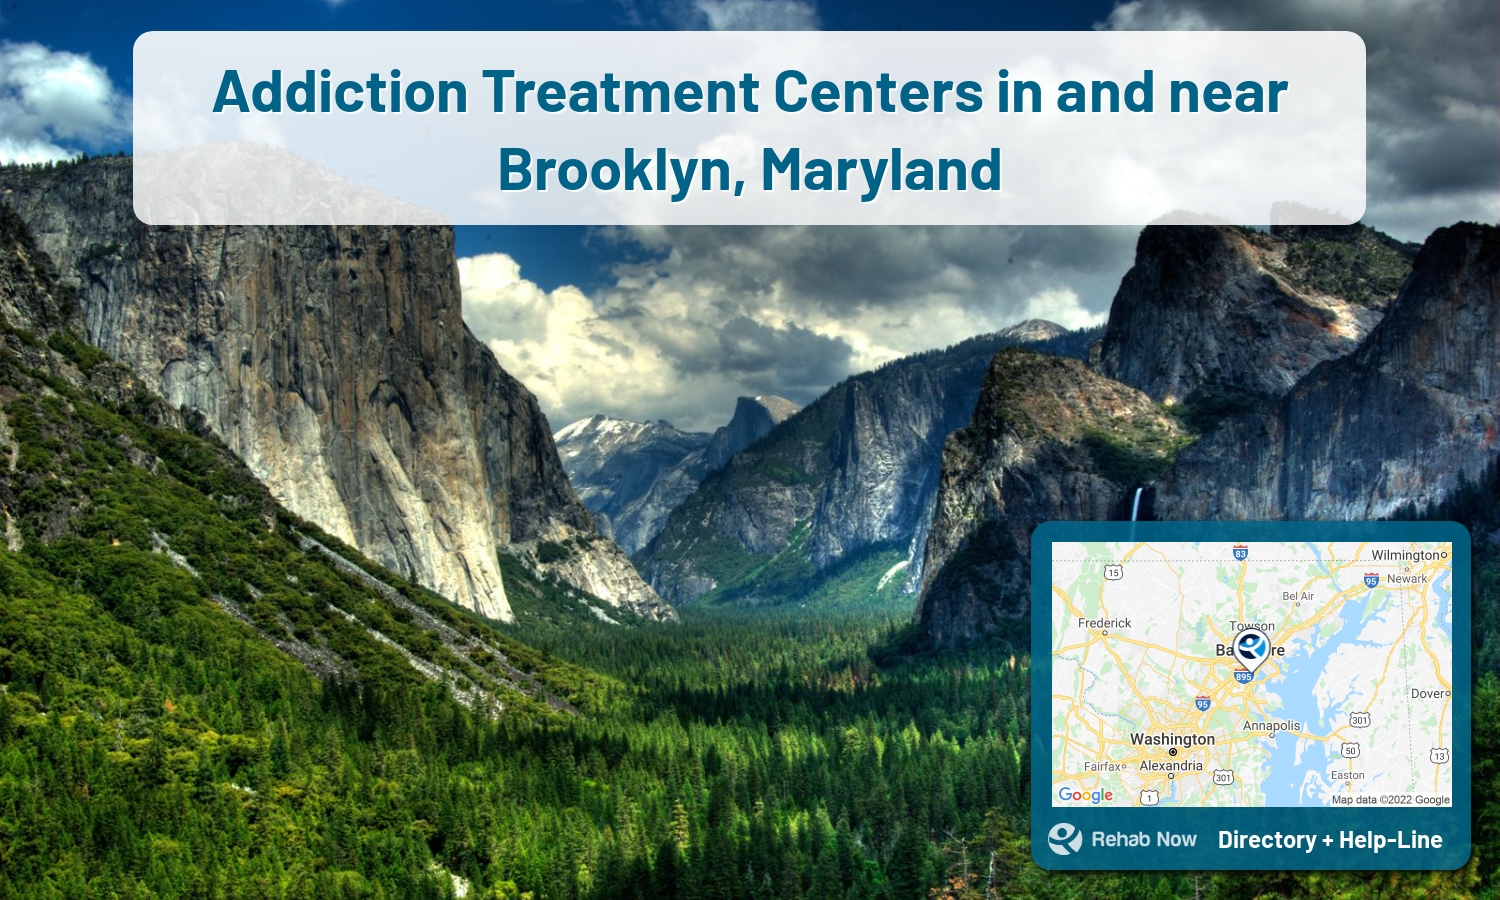 Brooklyn, MD Treatment Centers. Find drug rehab in Brooklyn, Maryland, or detox and treatment programs. Get the right help now!